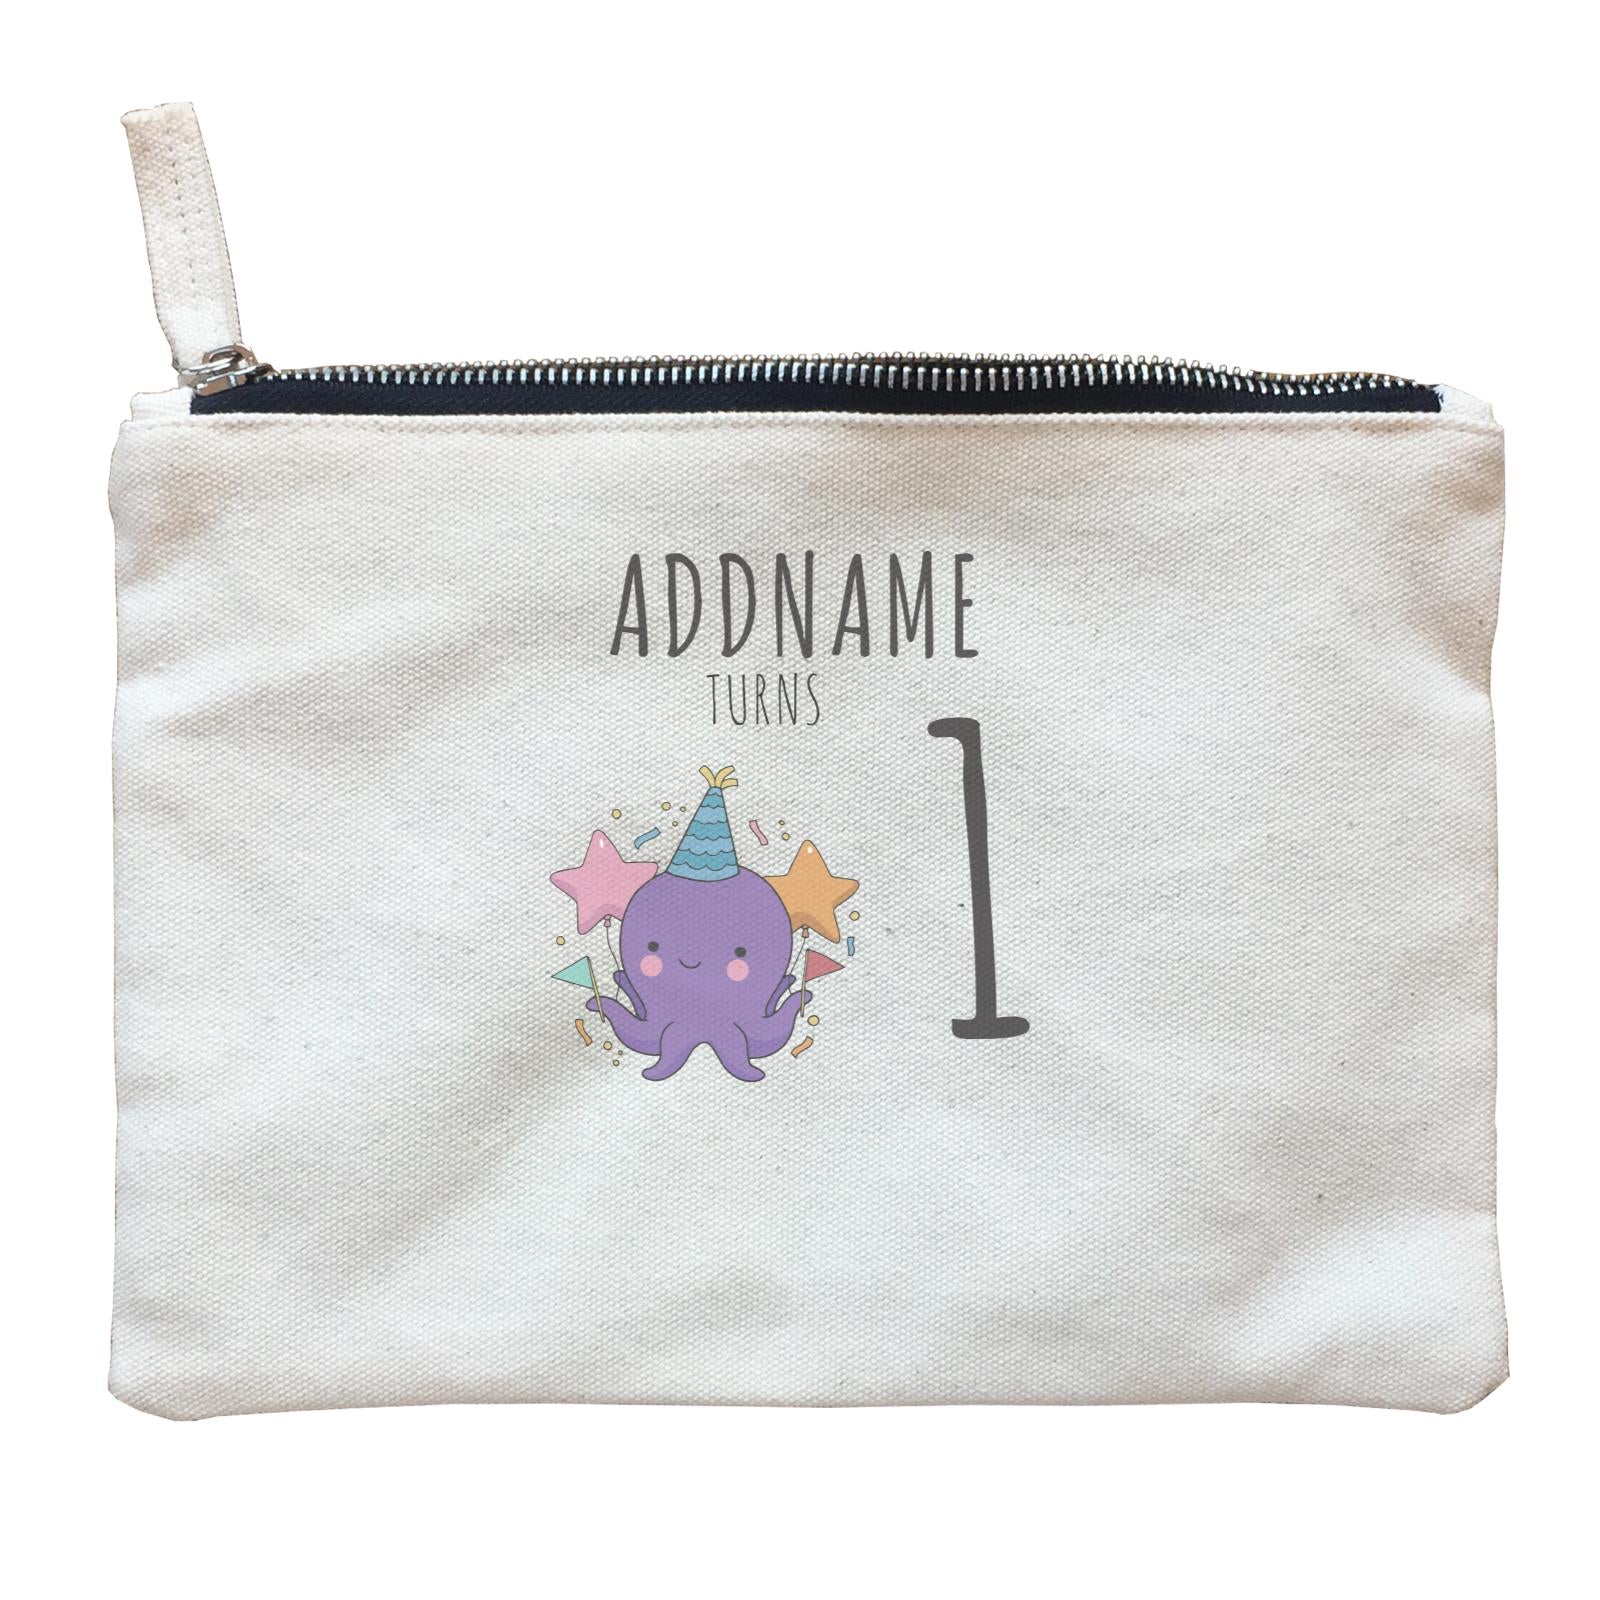 Birthday Sketch Animals Octopus with Flags Addname Turns 1 Zipper Pouch